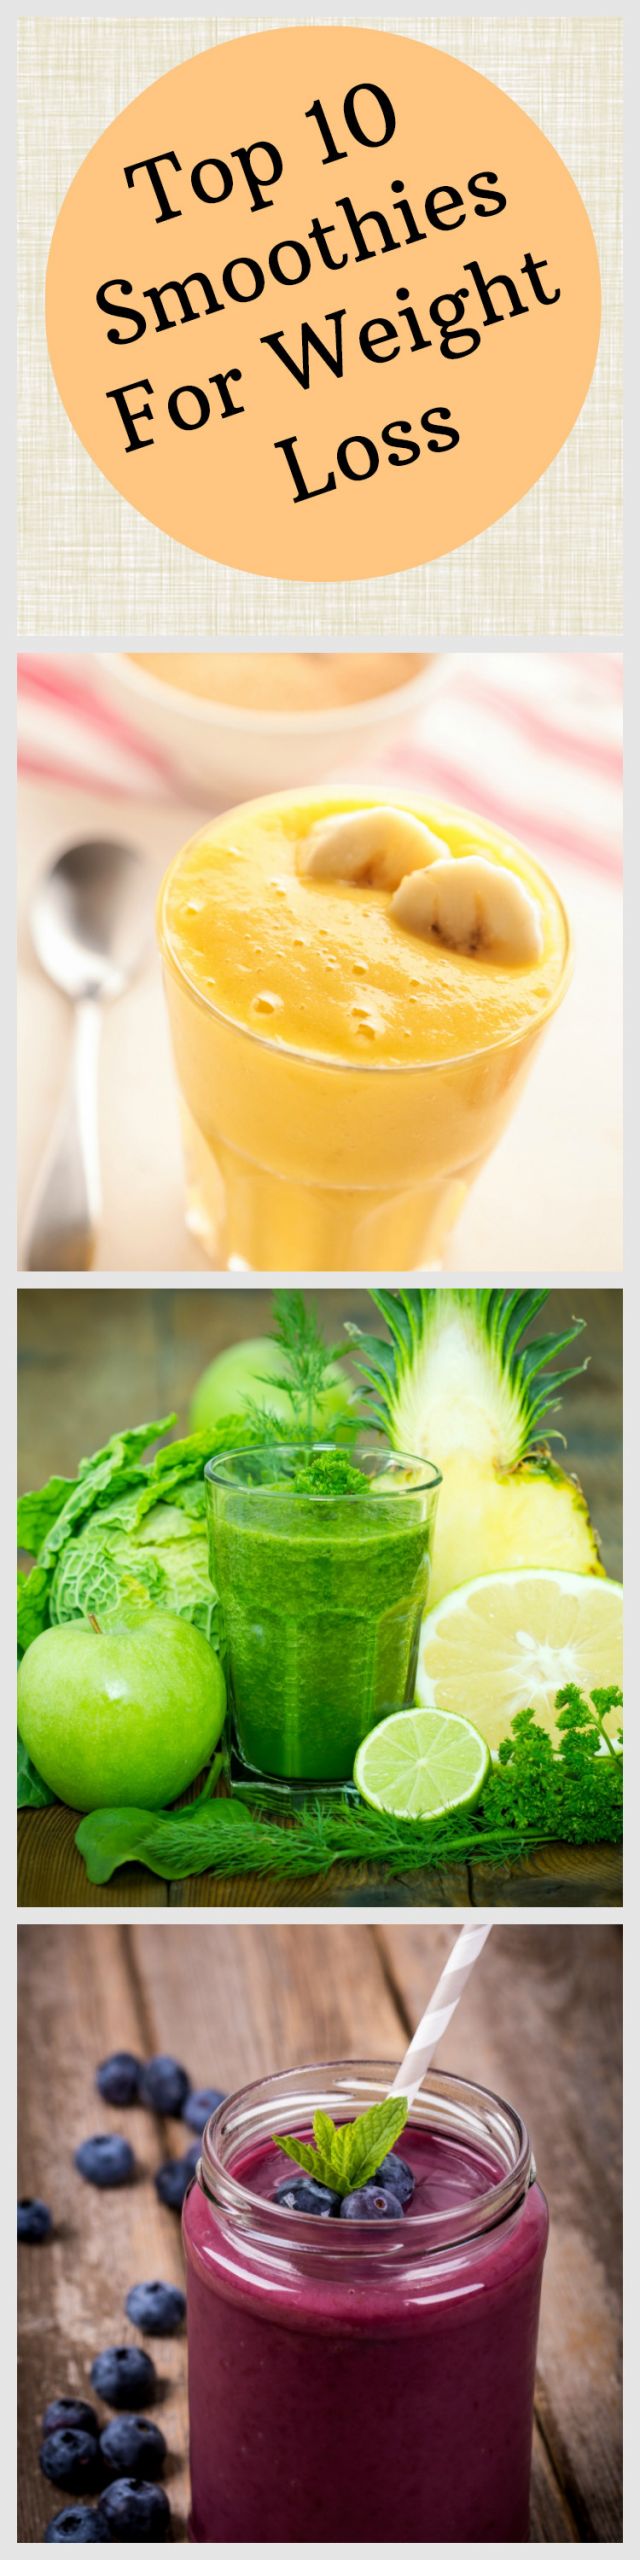 Best Fruit Smoothies For Weight Loss
 10 Awesome Smoothies for Weight Loss All Nutribullet Recipes